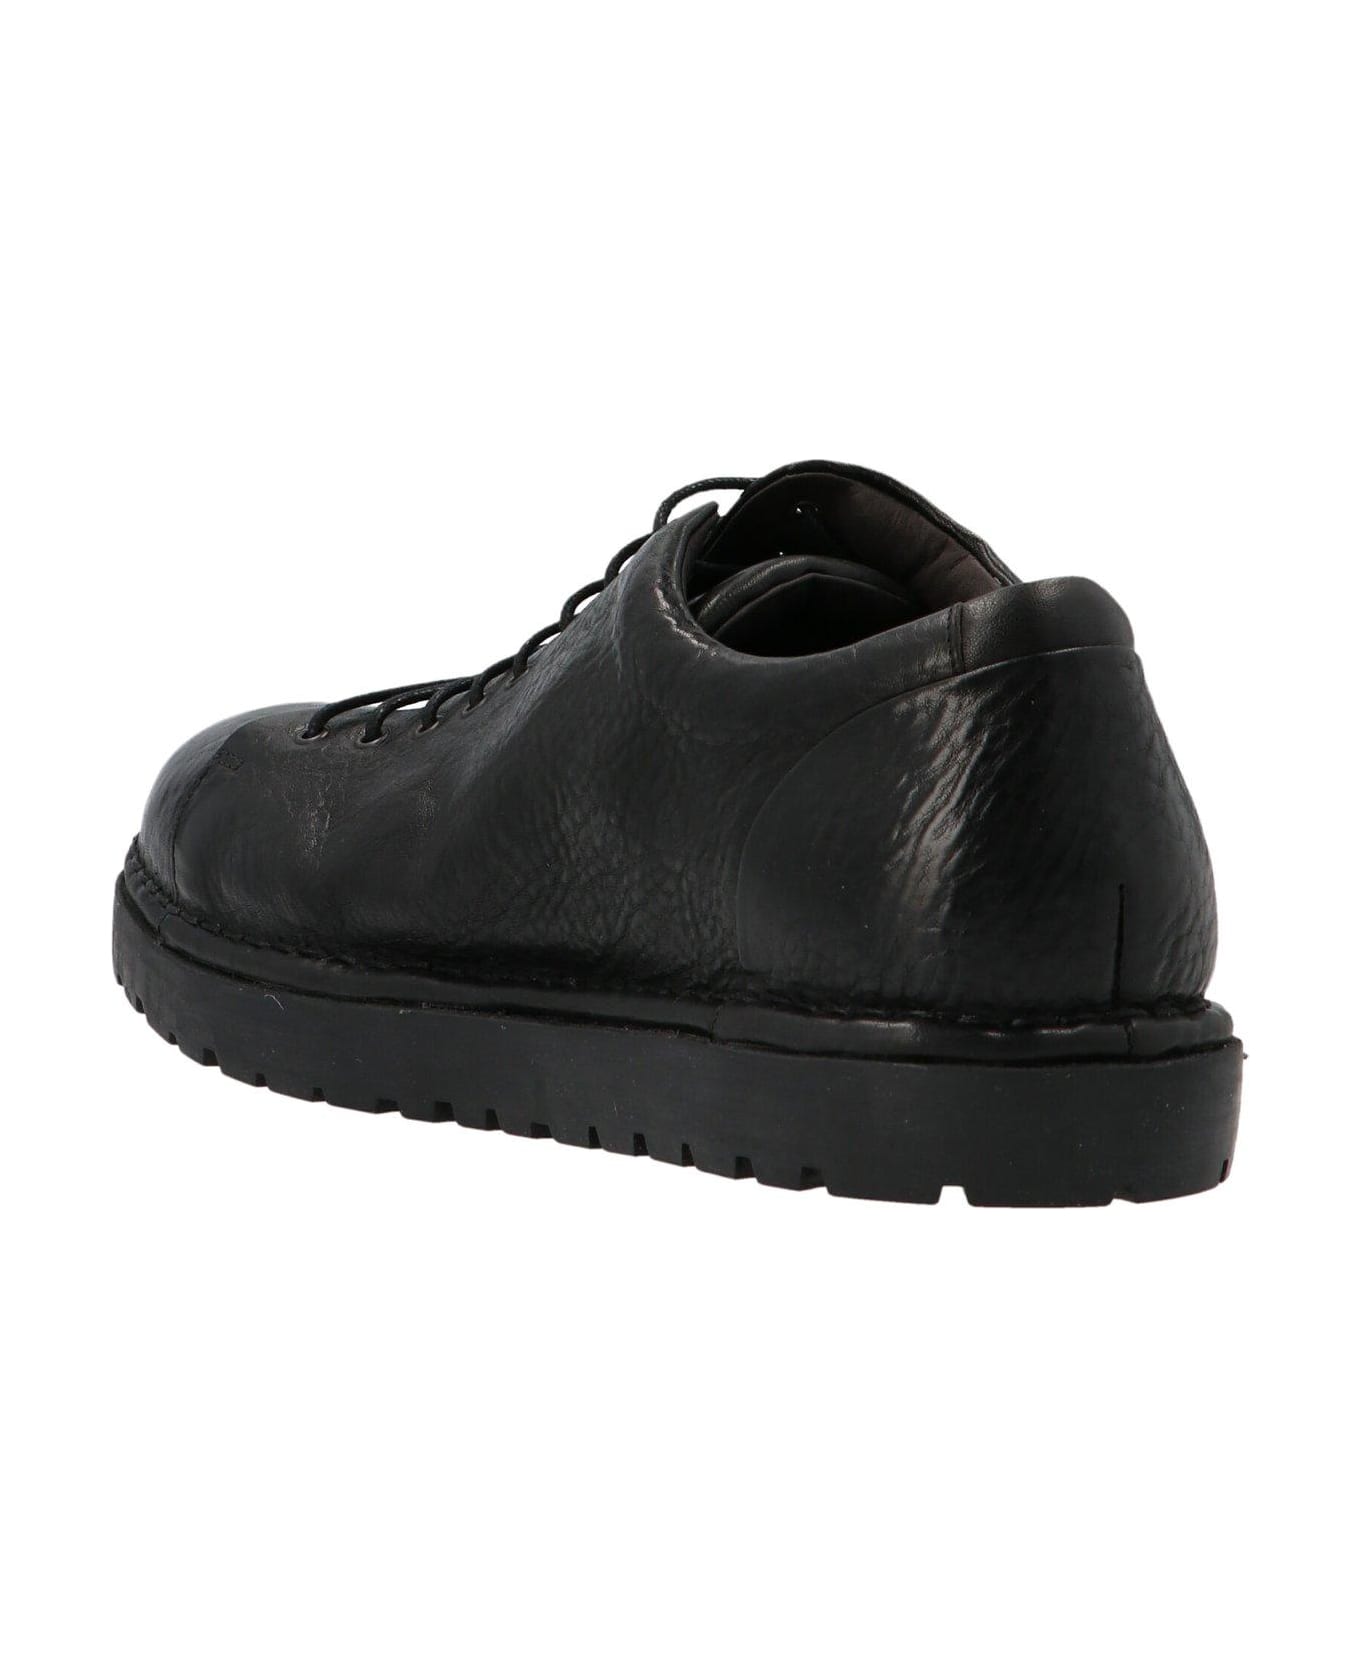 Marsell Pallottola Derby Shoes - Black